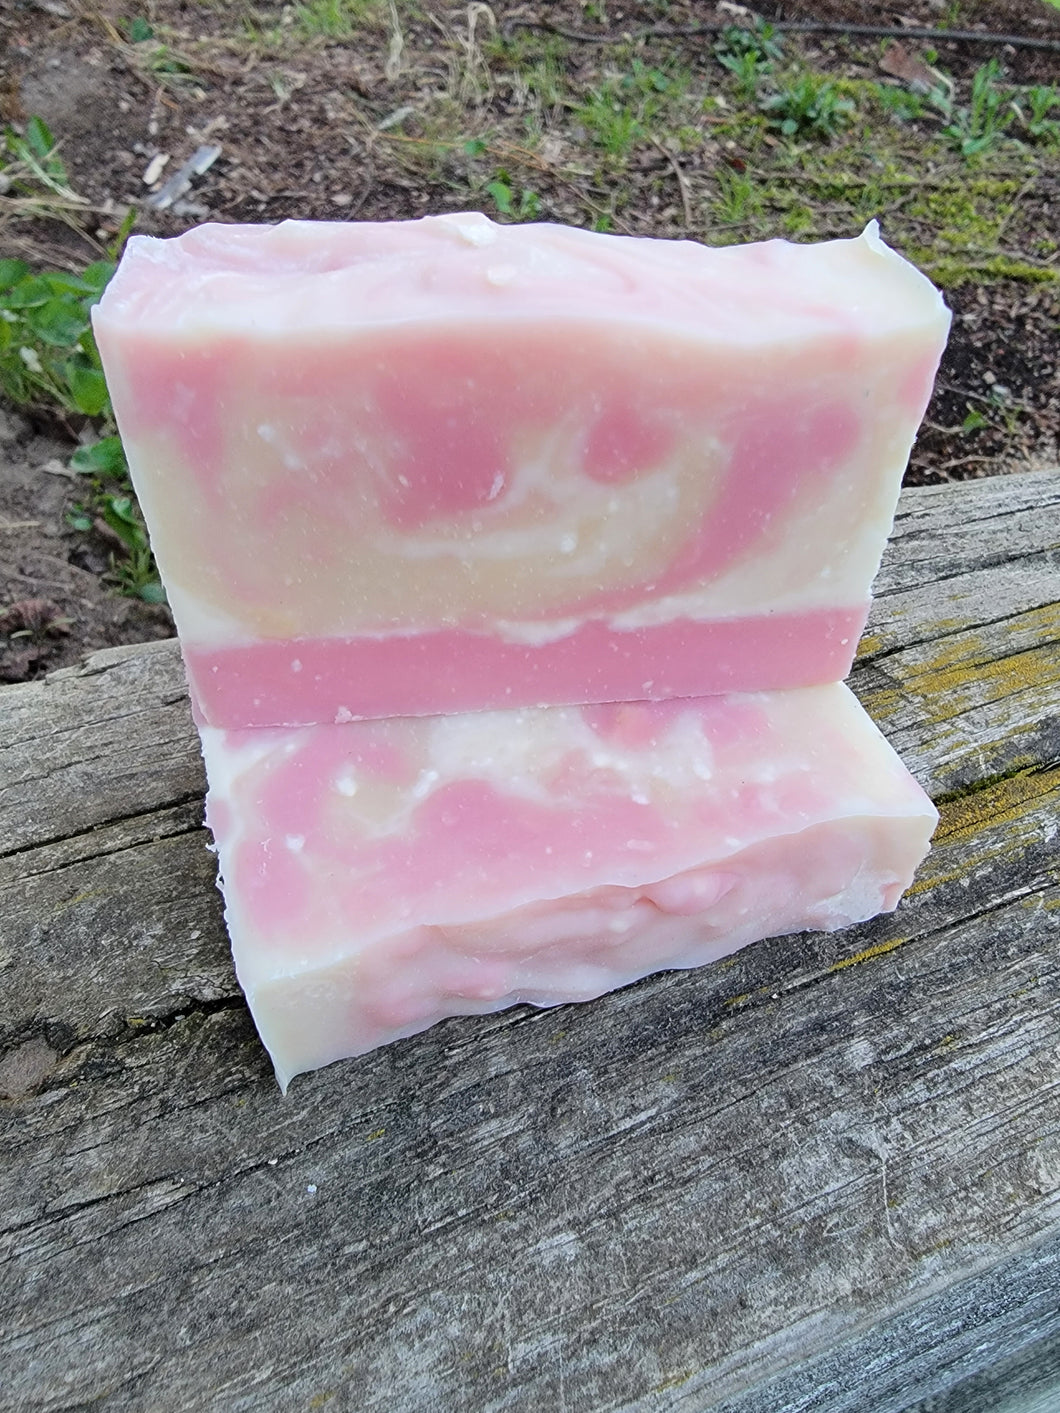 Pink, white and tan swirled soap.